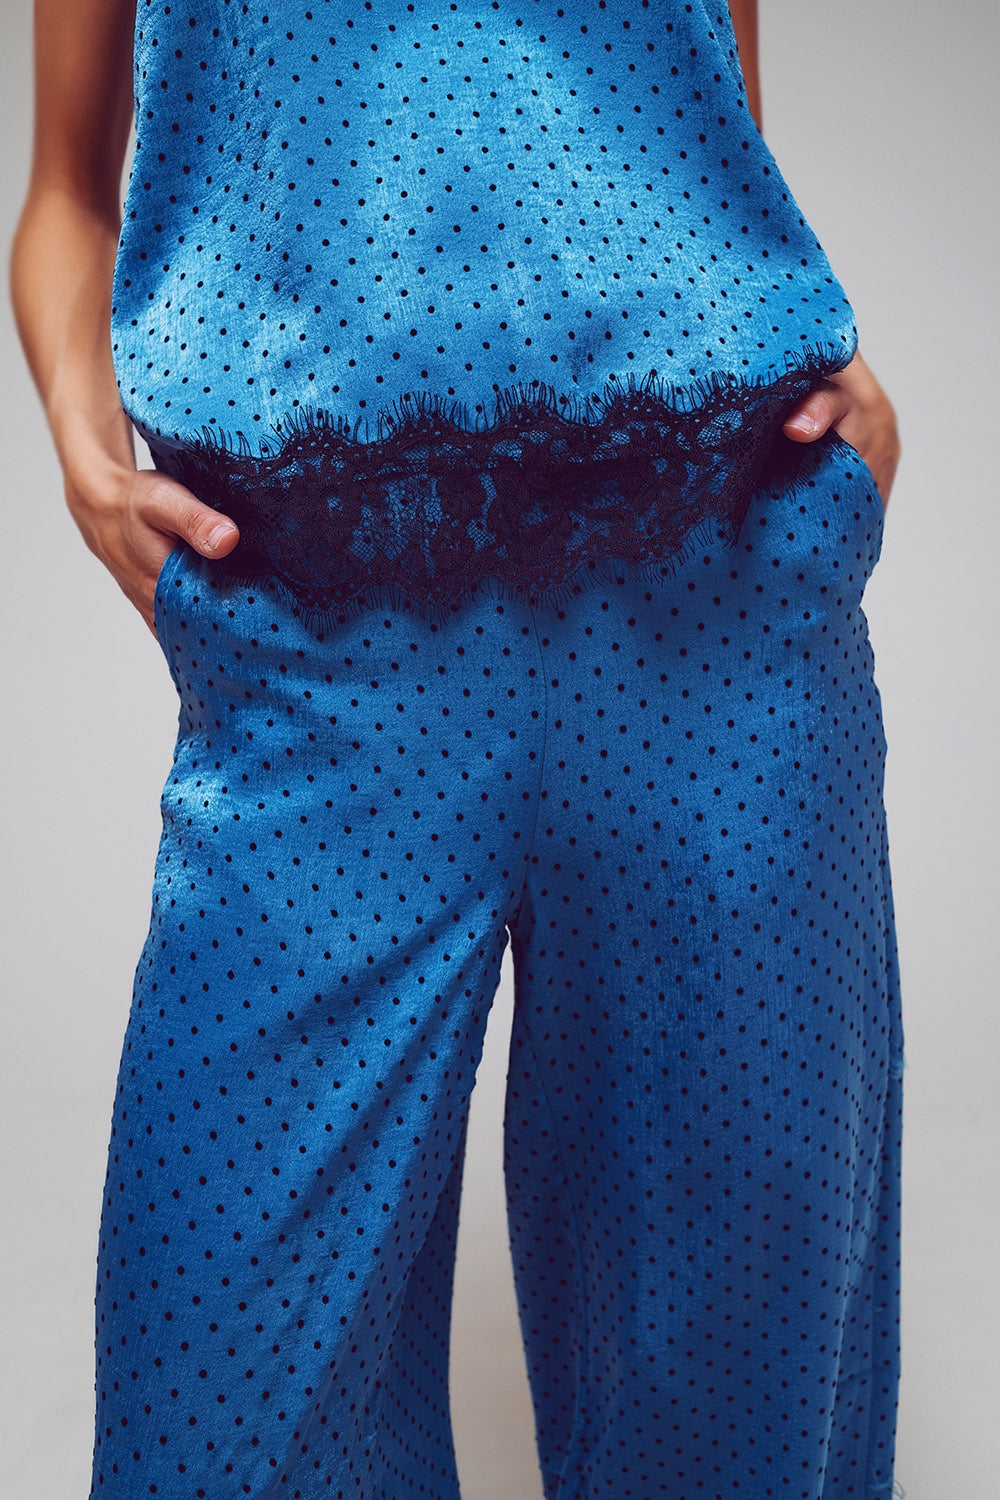 Wide Dotted Pants with Lace at the Hems - Szua Store